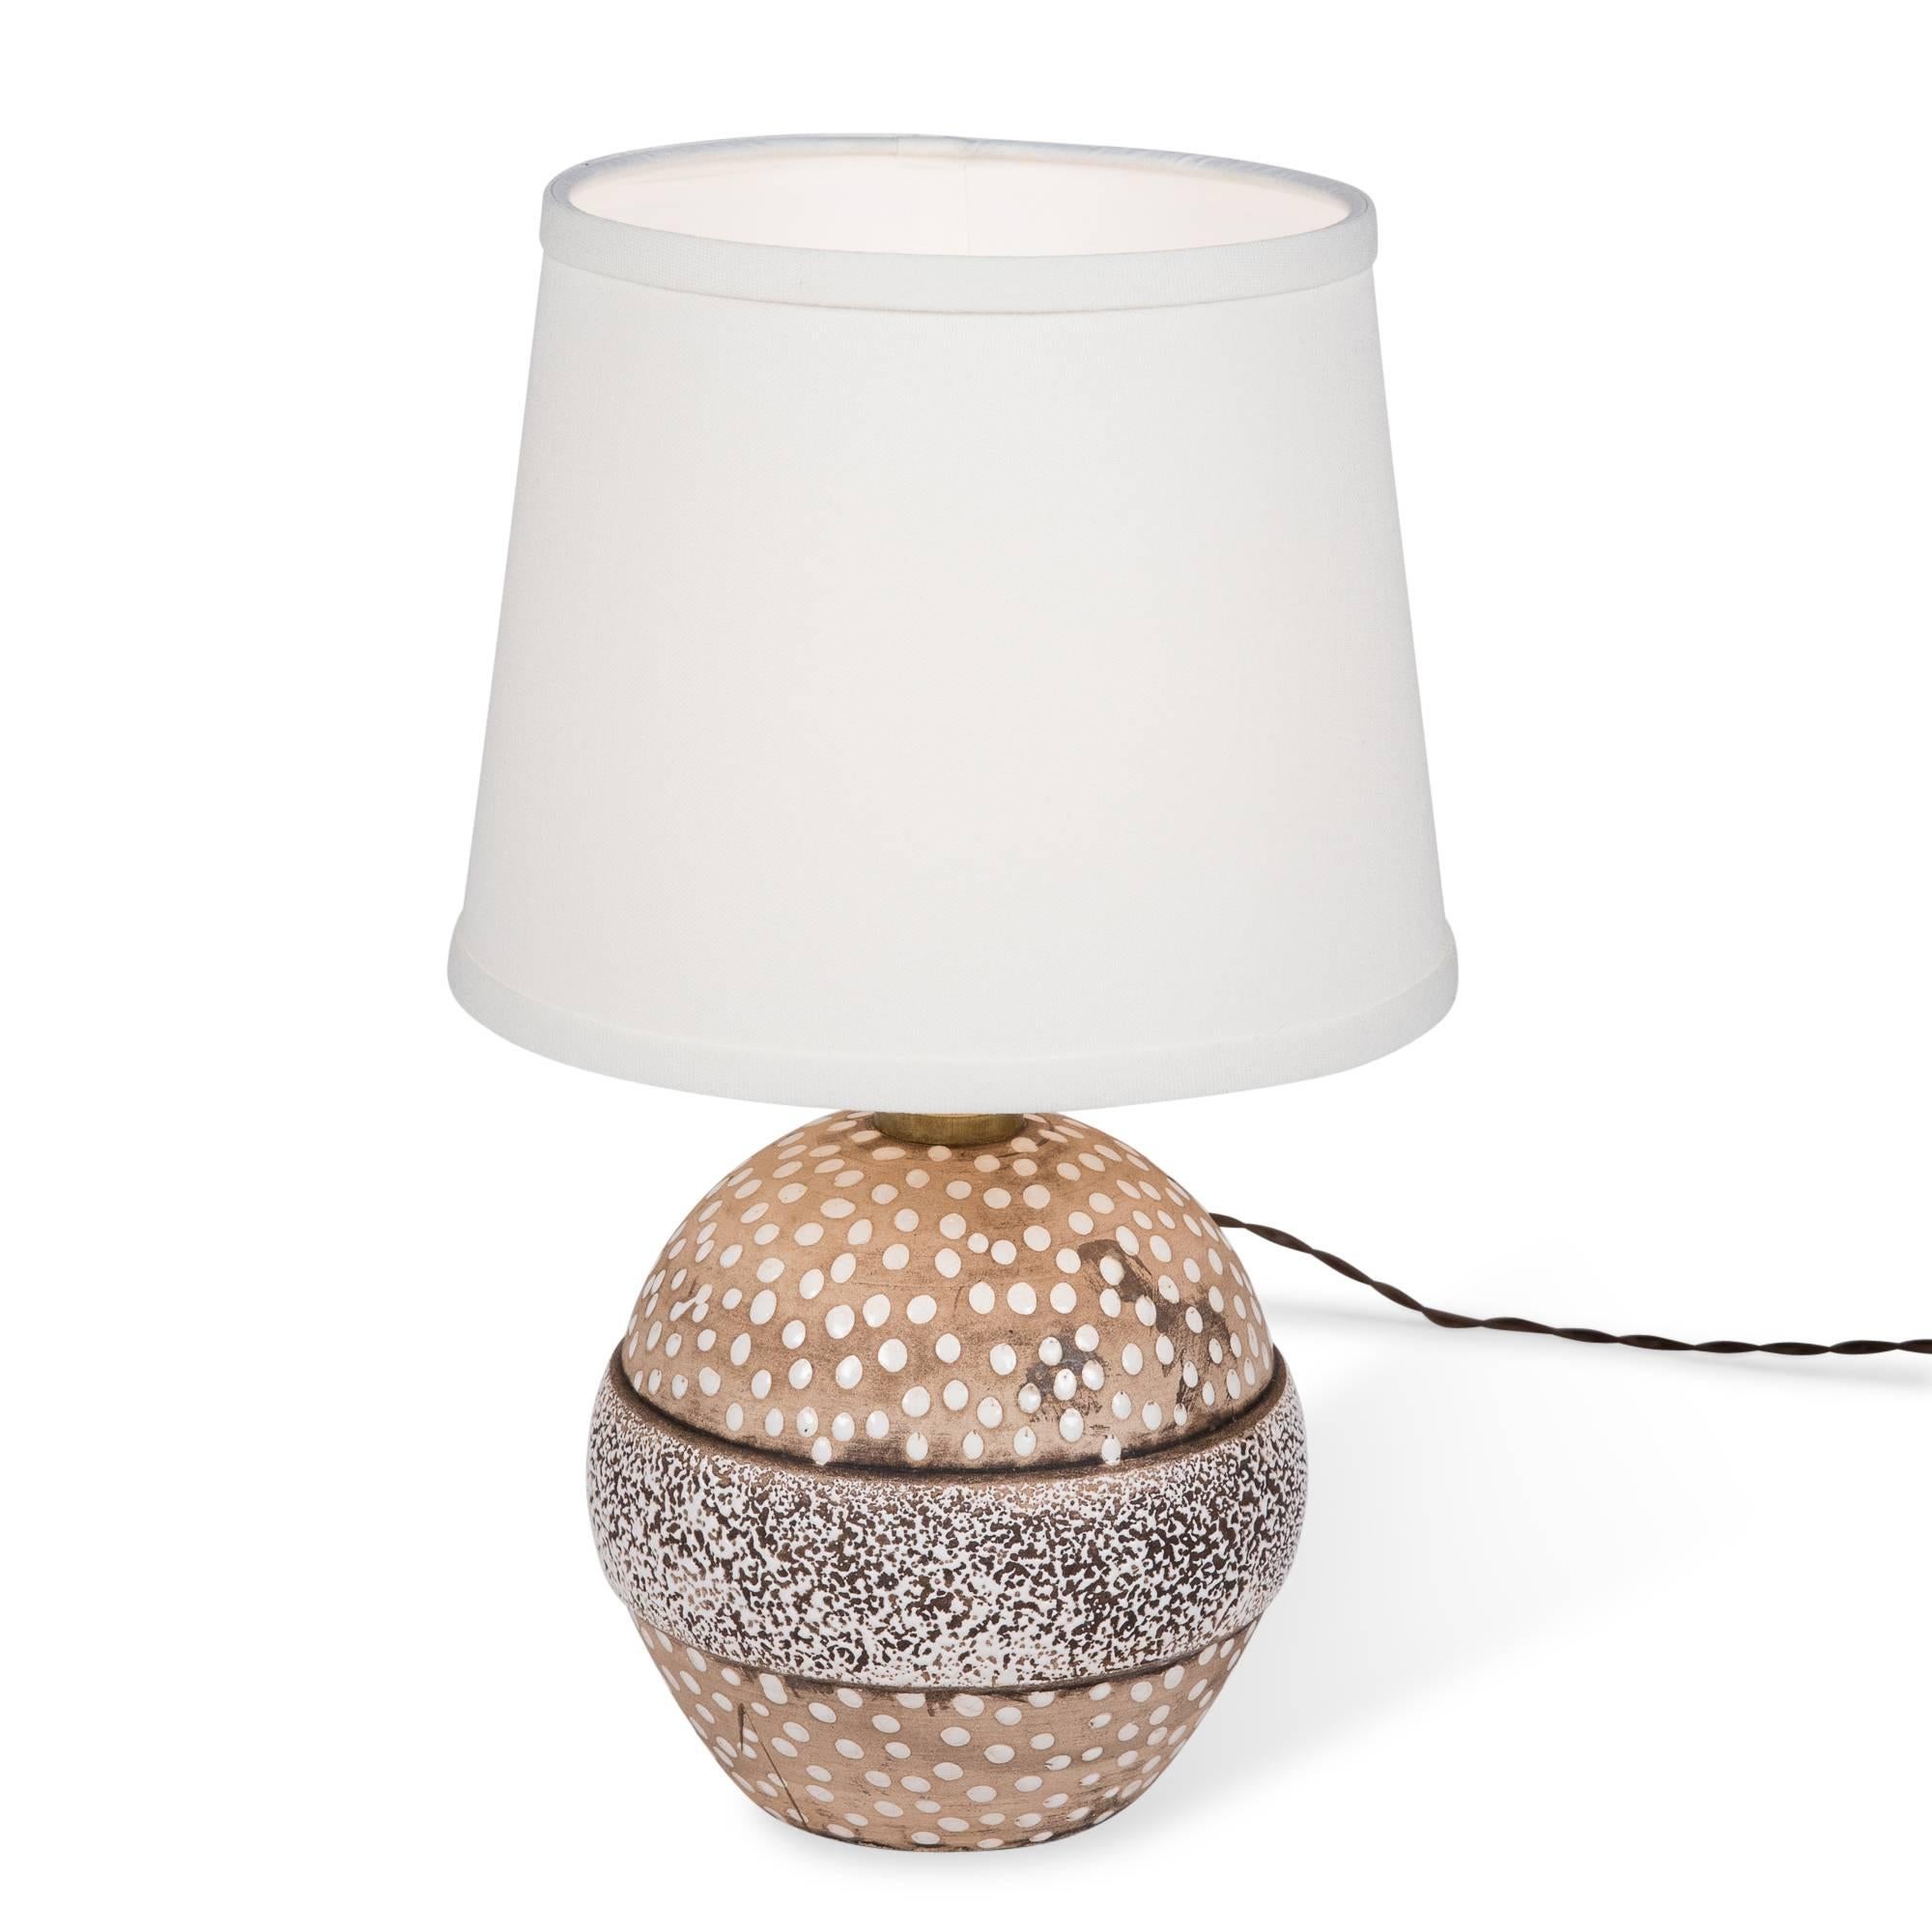 Glazed and spotted ceramic table lamp, of spherical form, with central darkened band by Louis Dage, France, 1930s. Overall height 14 1/2 in, diameter of base 5 1/2 in. Shade measures top diameter 7 in, bottom dia 9 in, height 7 in.